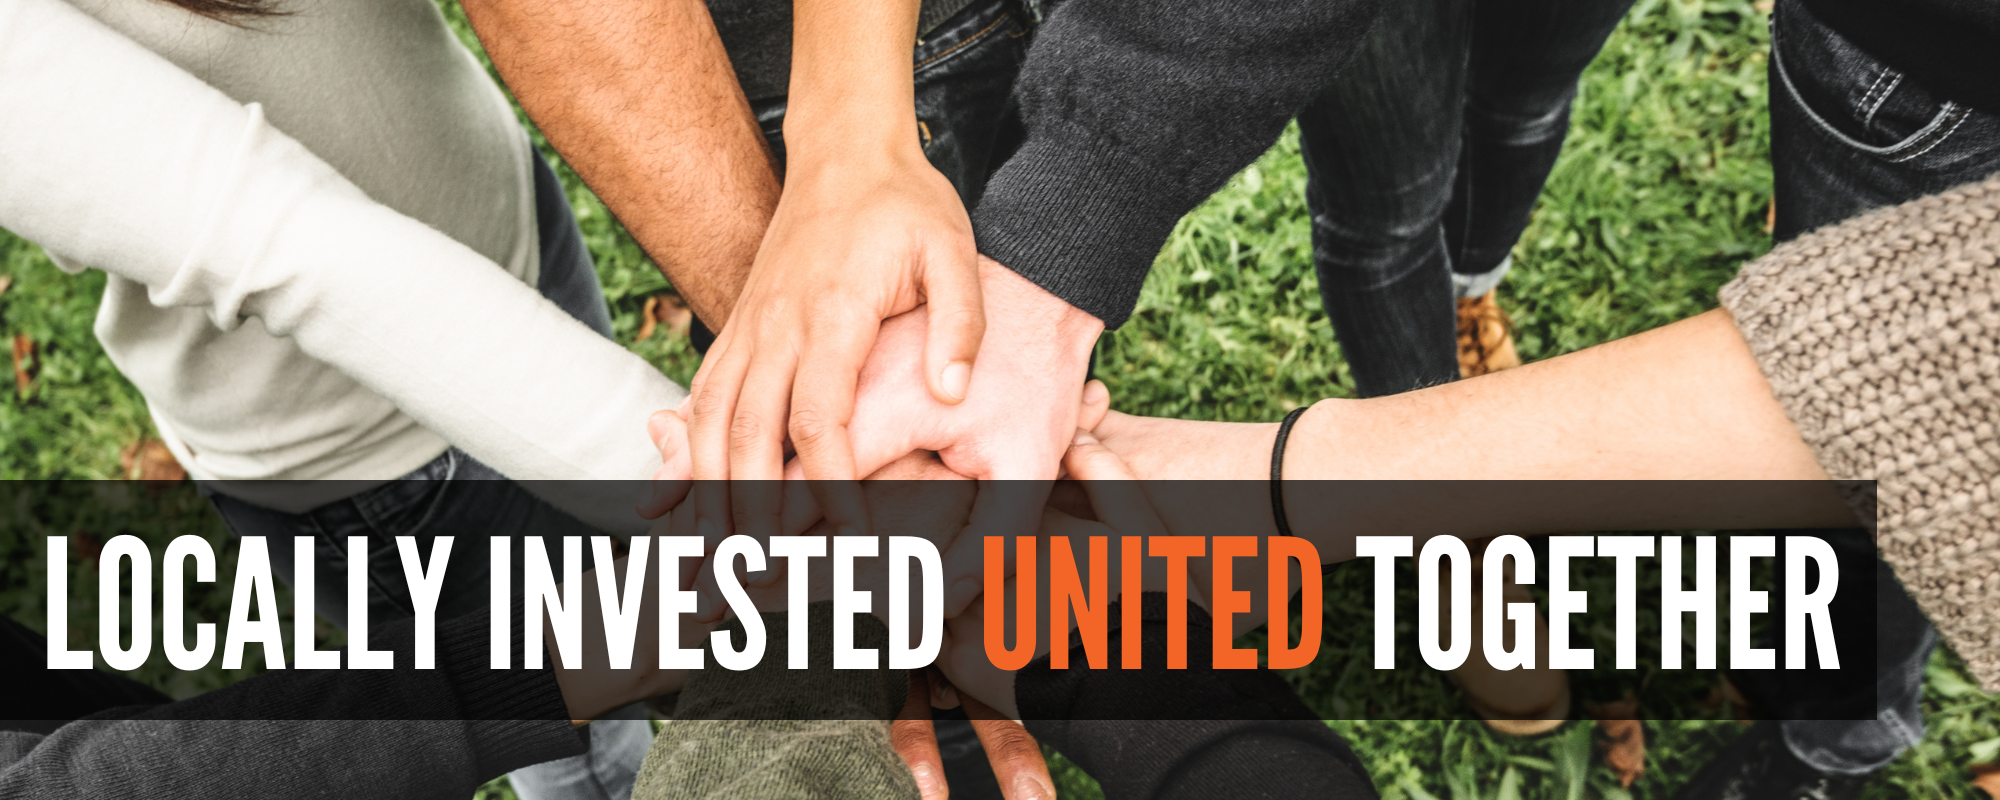 Locally Invested United Together